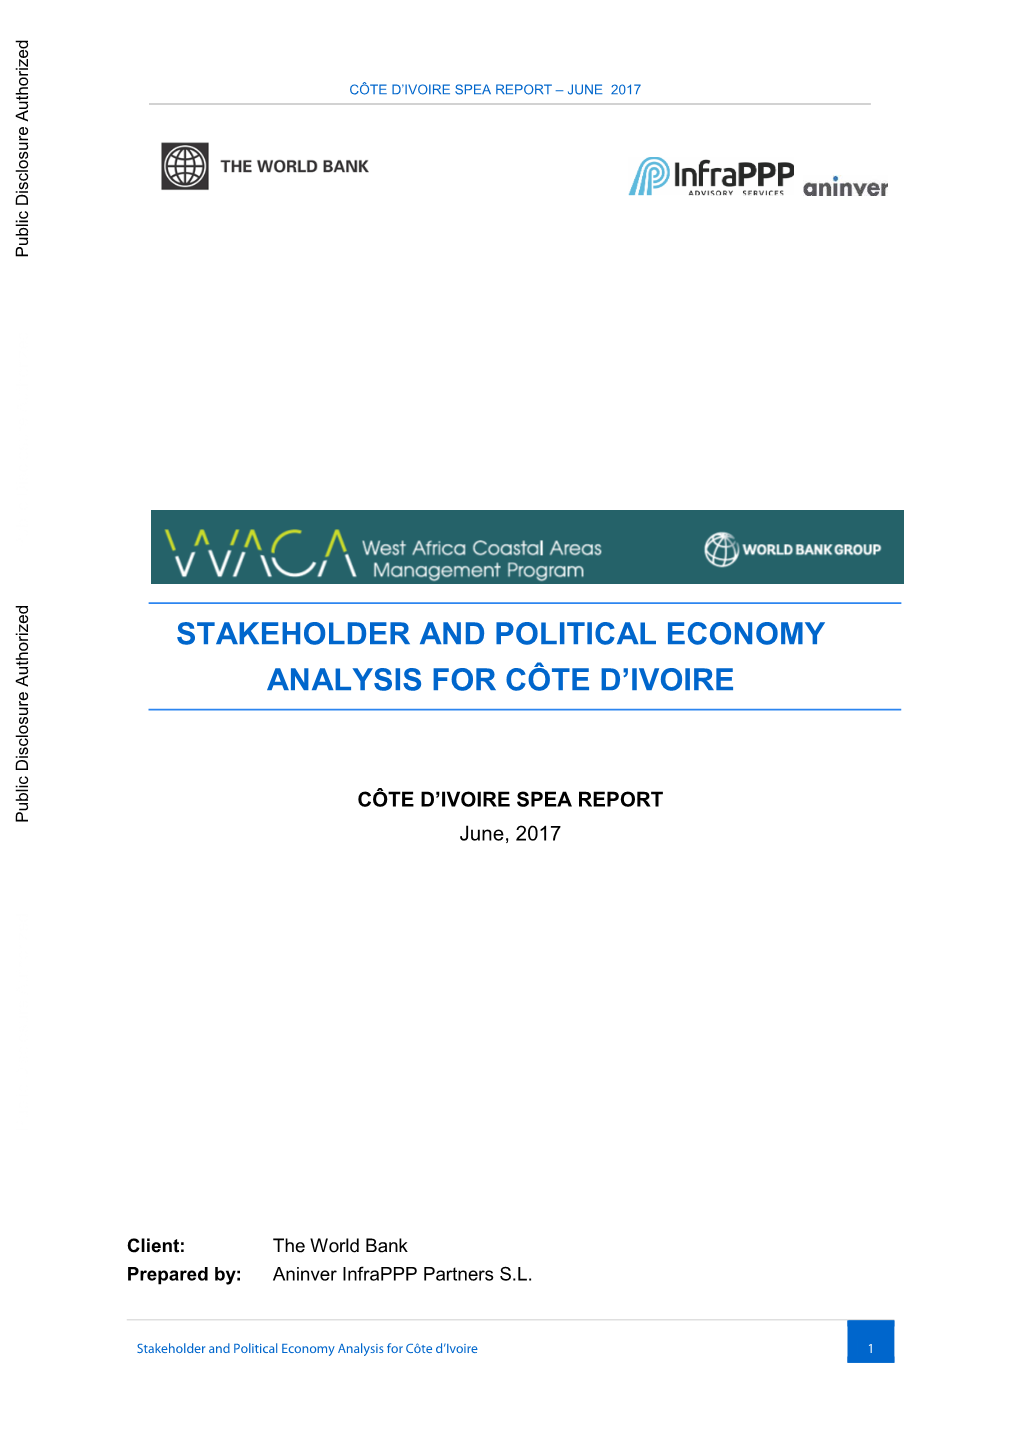 Stakeholder and Political Economy Analysis for Côte D’Ivoire